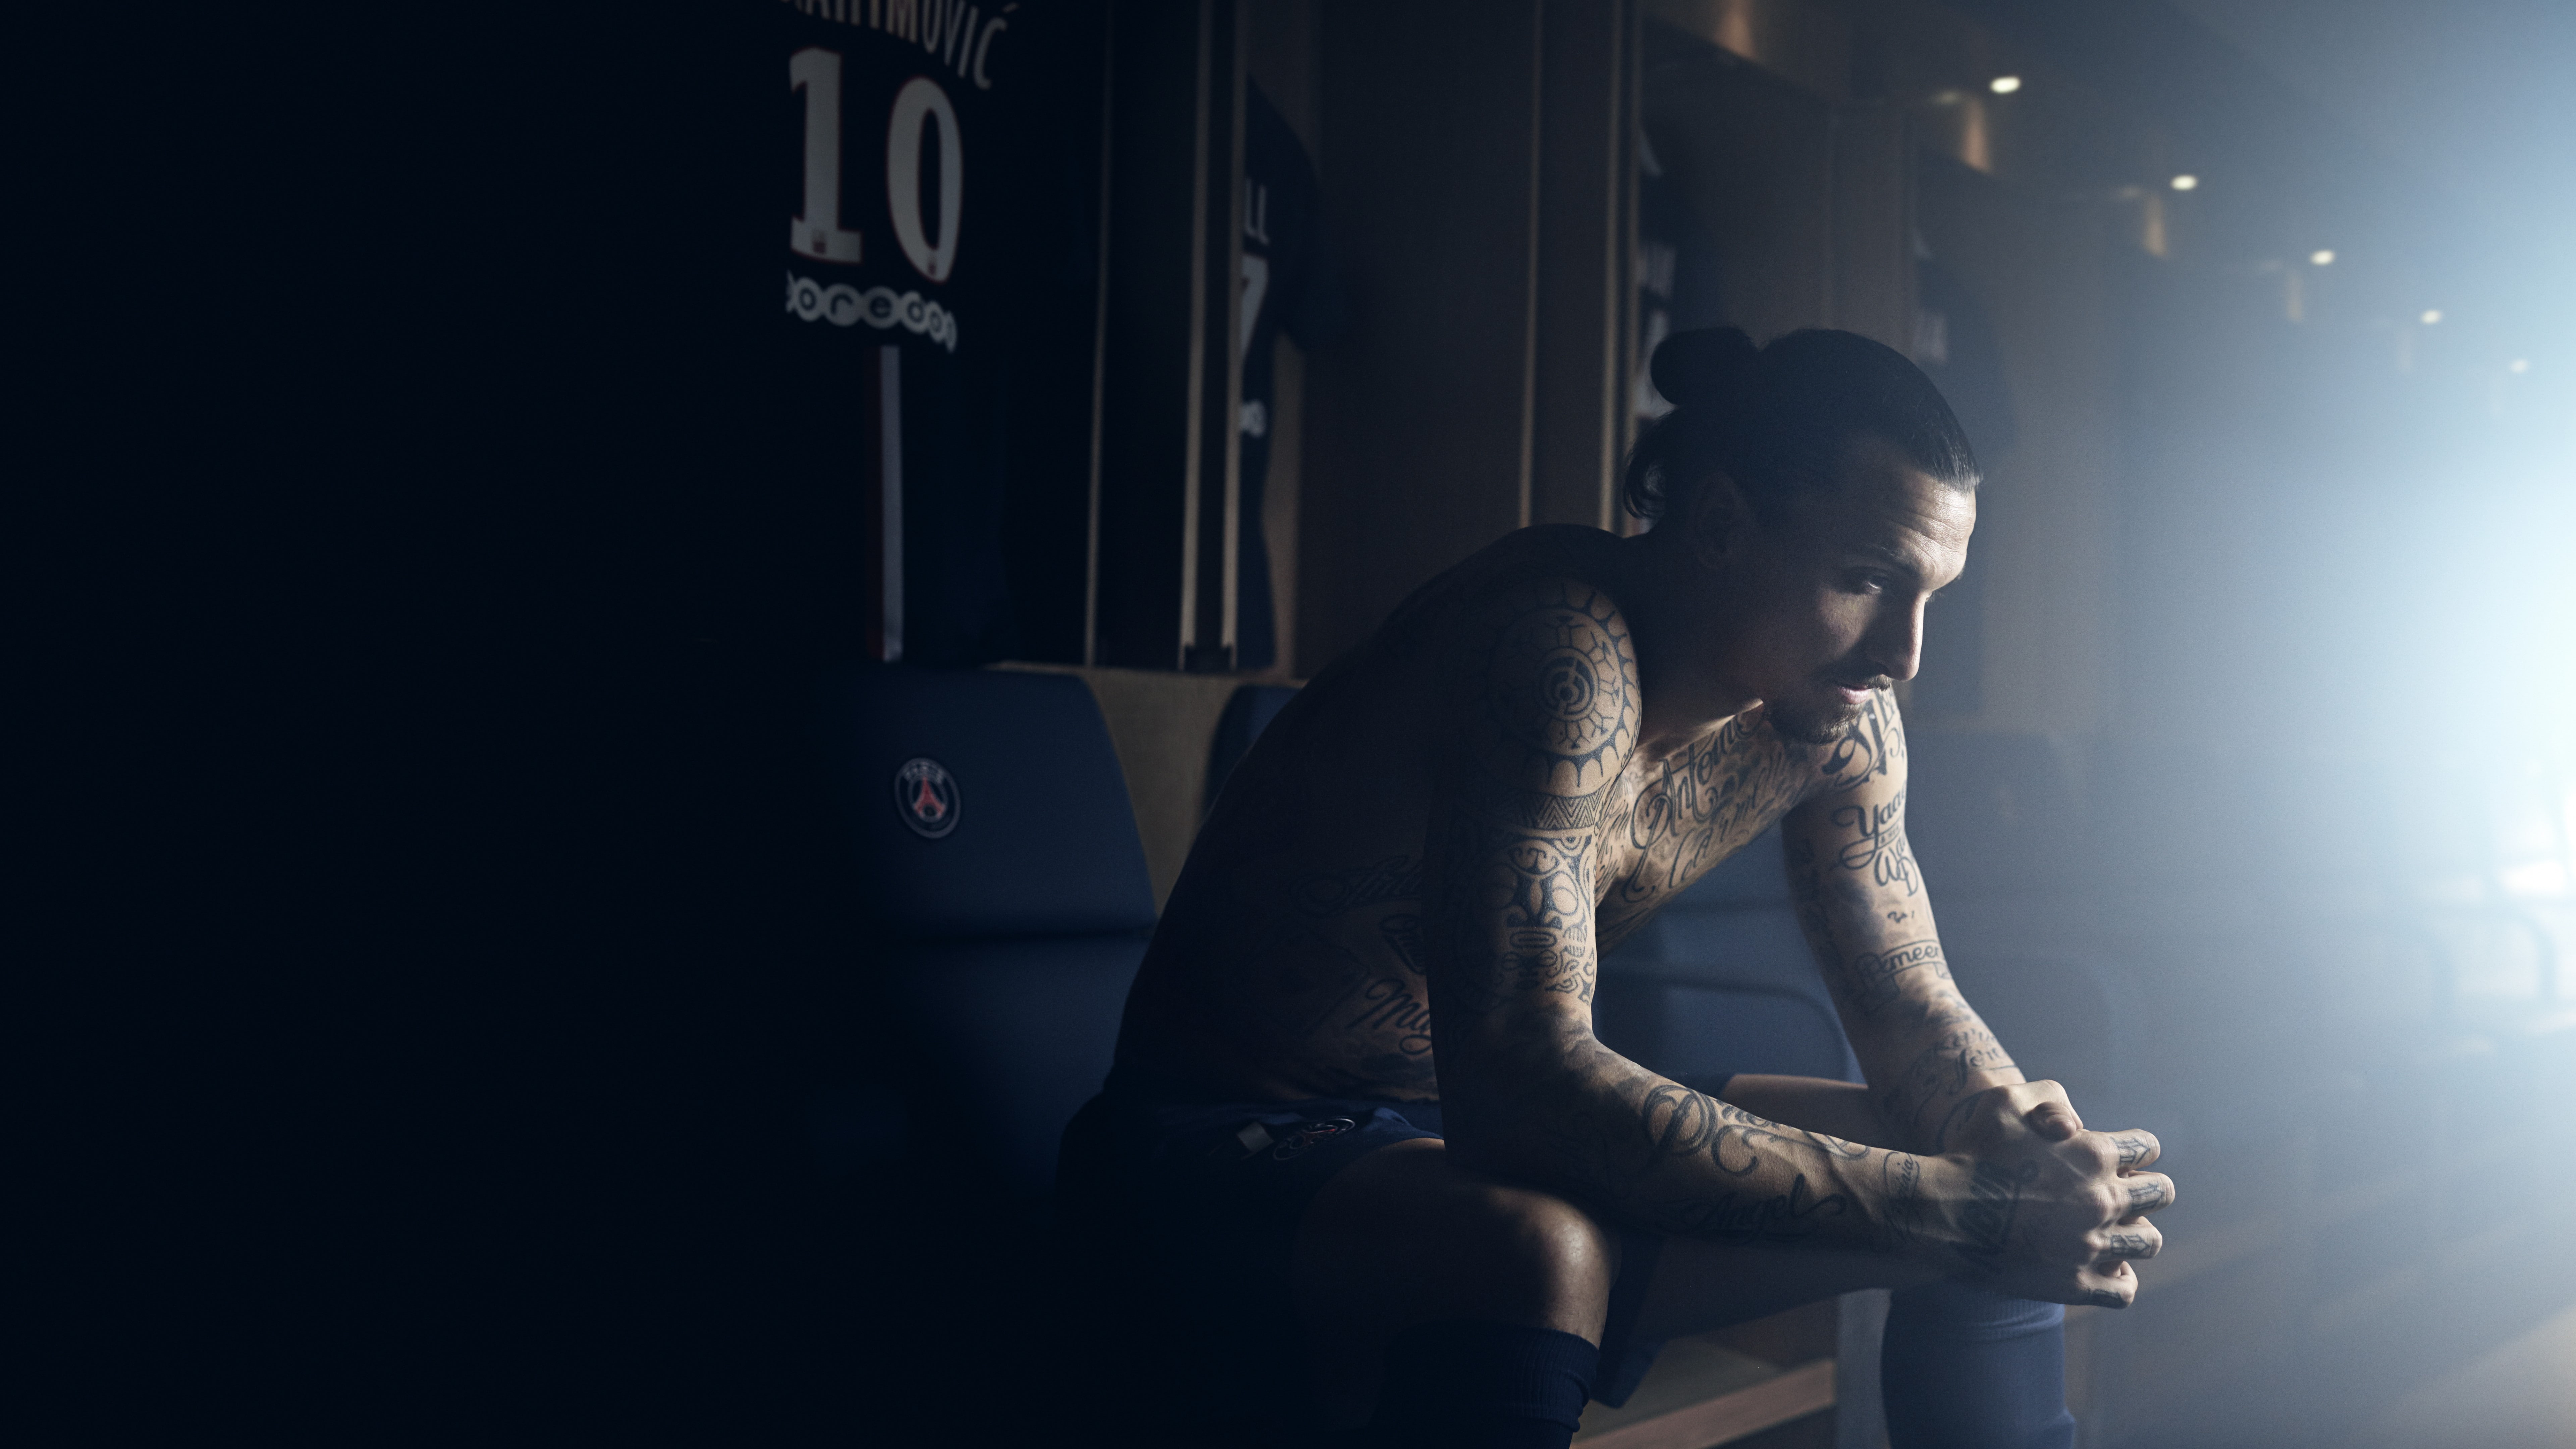 topless man sit on blue chair inside well lit room, Football